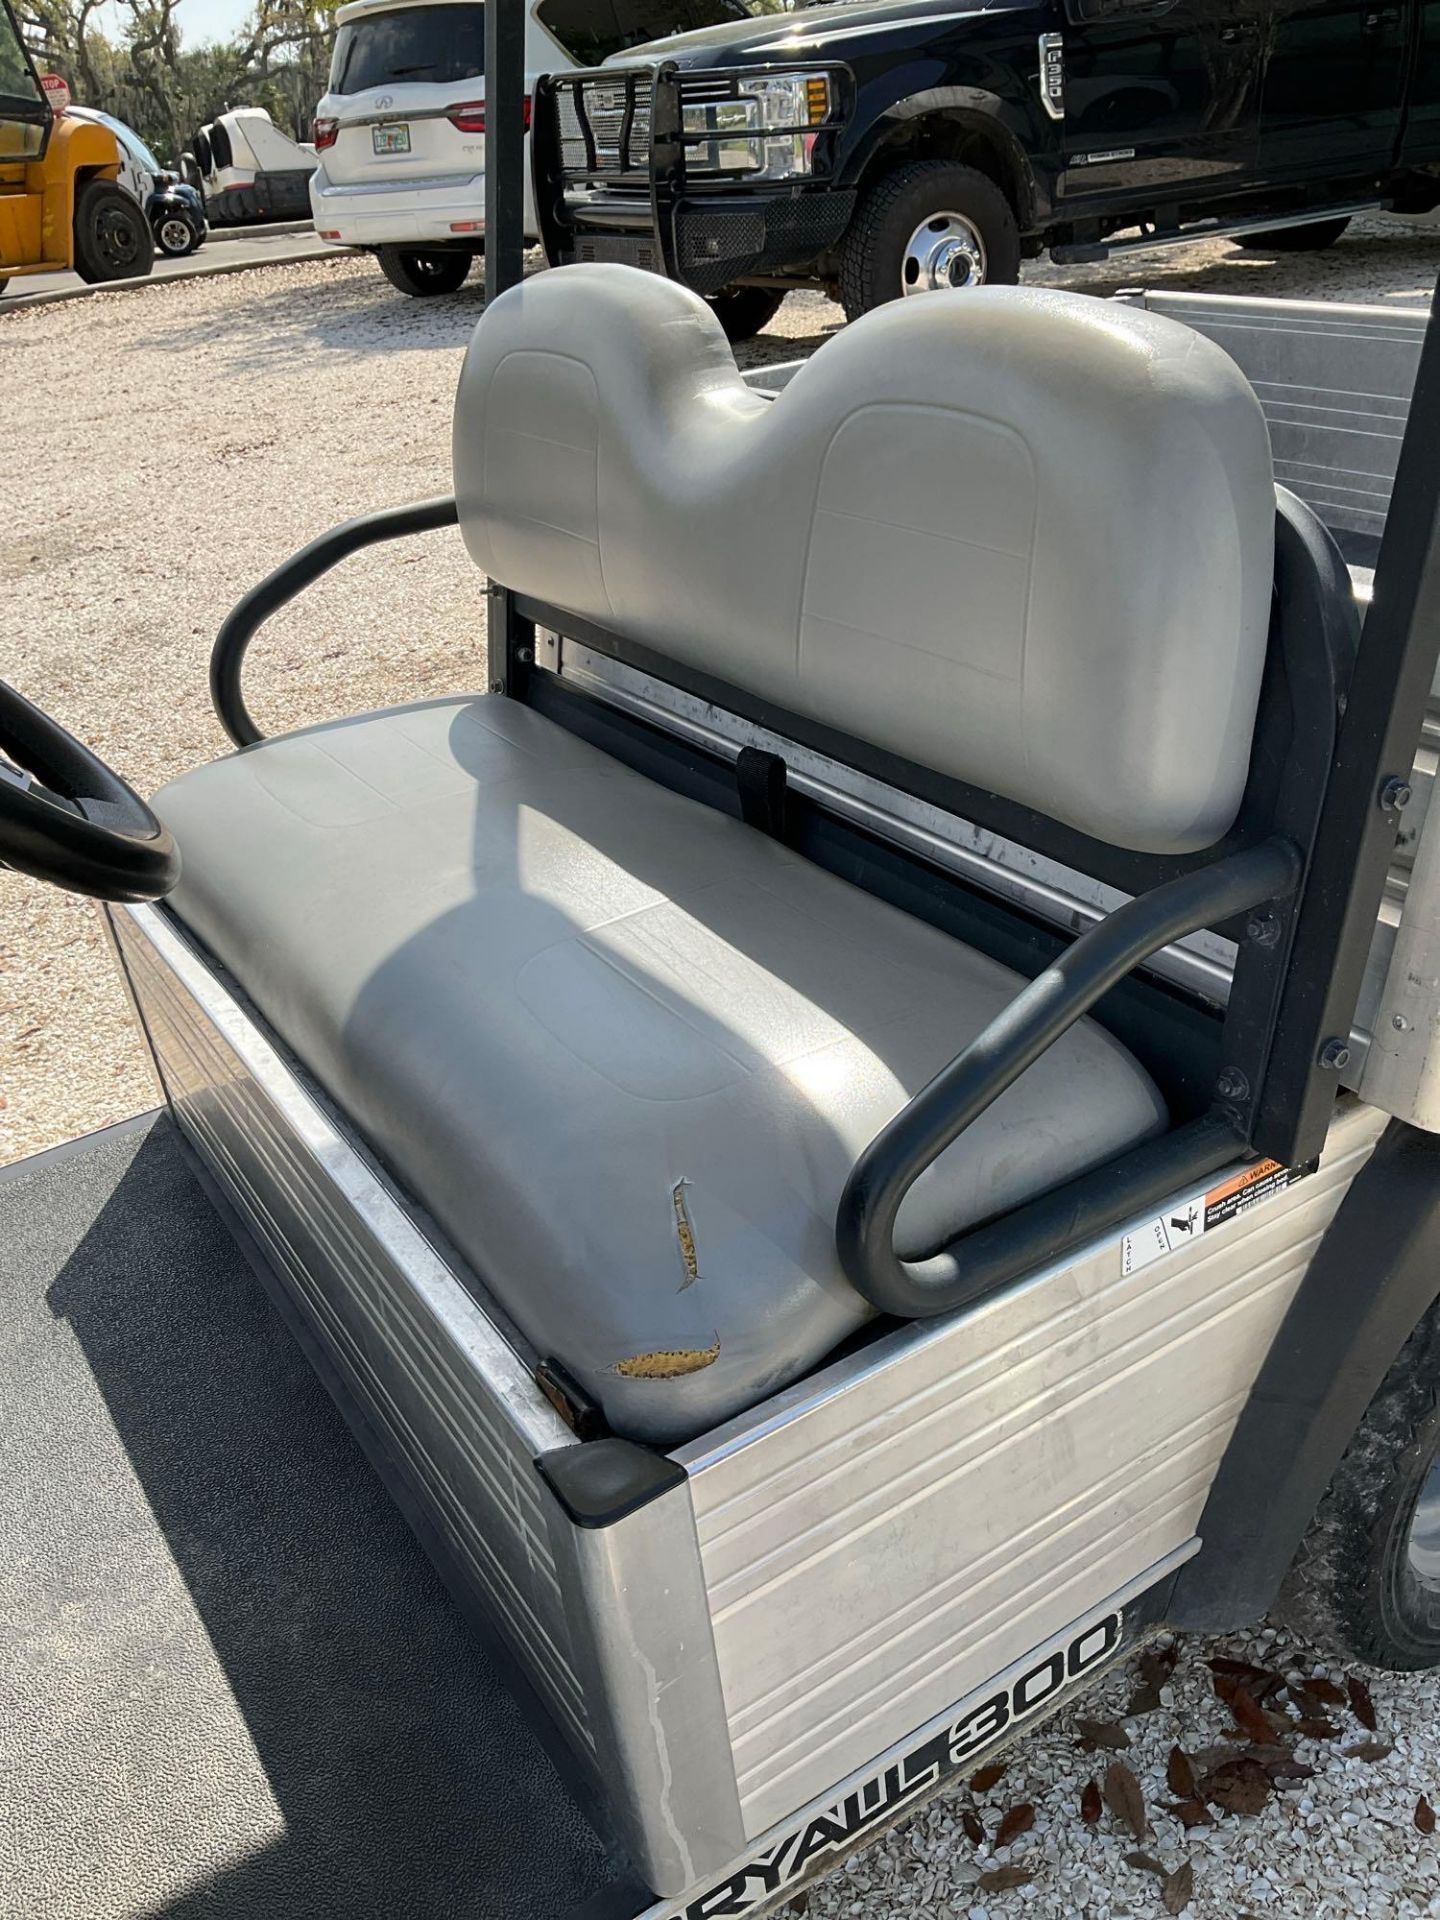 2018 CLUB CAR CARRYALL 300 ATV MODEL CA300 , ELECTRIC , MANUEL DUMP BED, BATTERY CHARGER INCLUDED... - Image 10 of 13